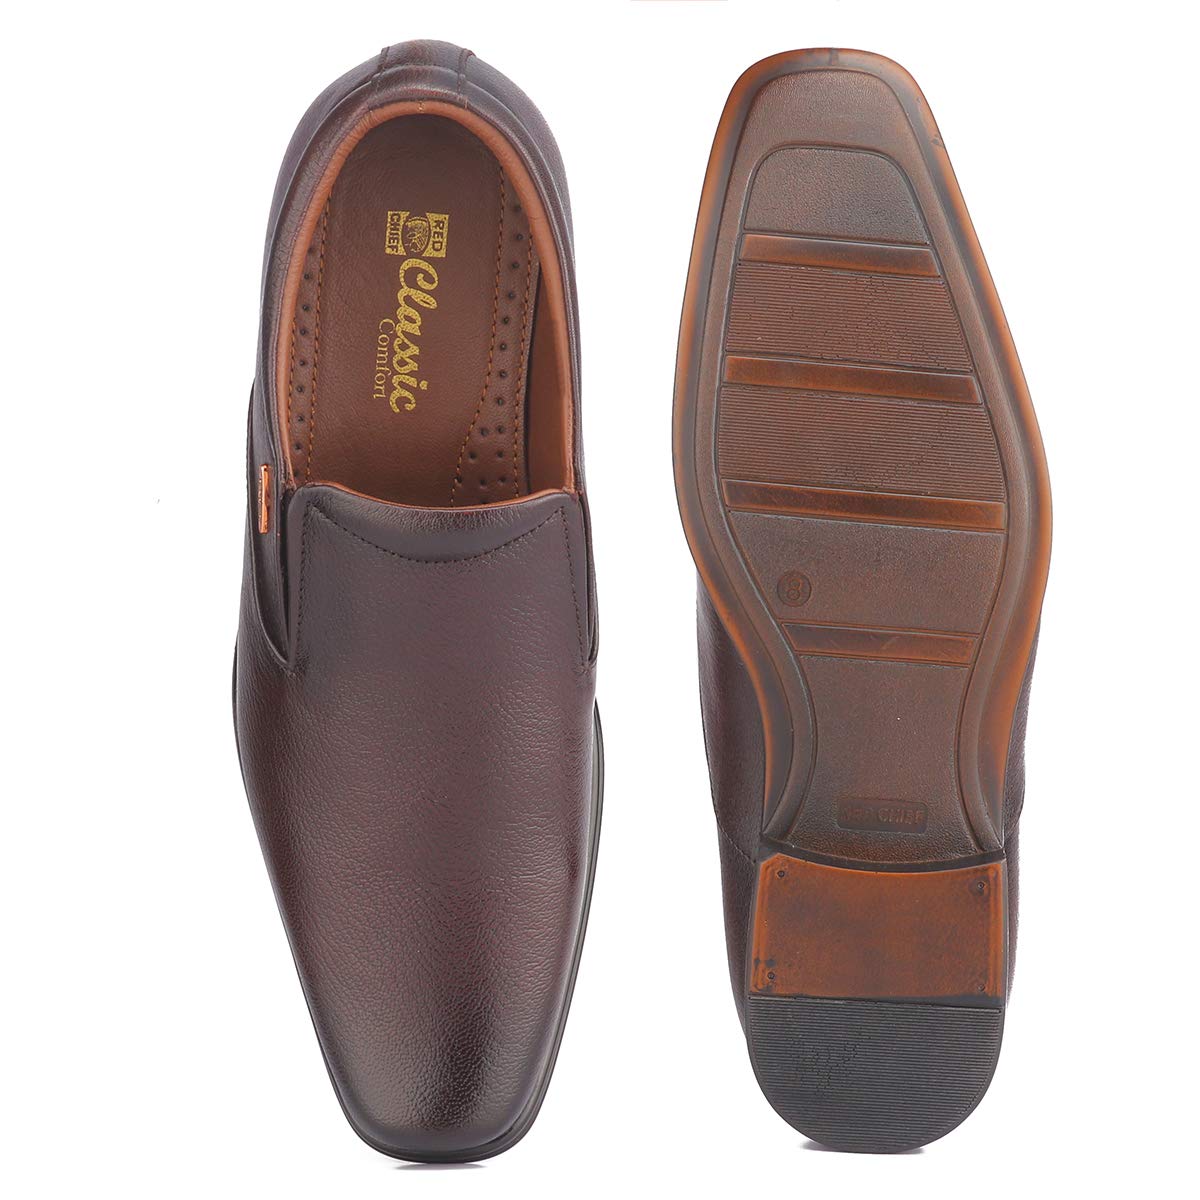 Red Chief Dark Brown Leather Formal Slip on Shoes for Men_Size 10_UK_RC1999 095